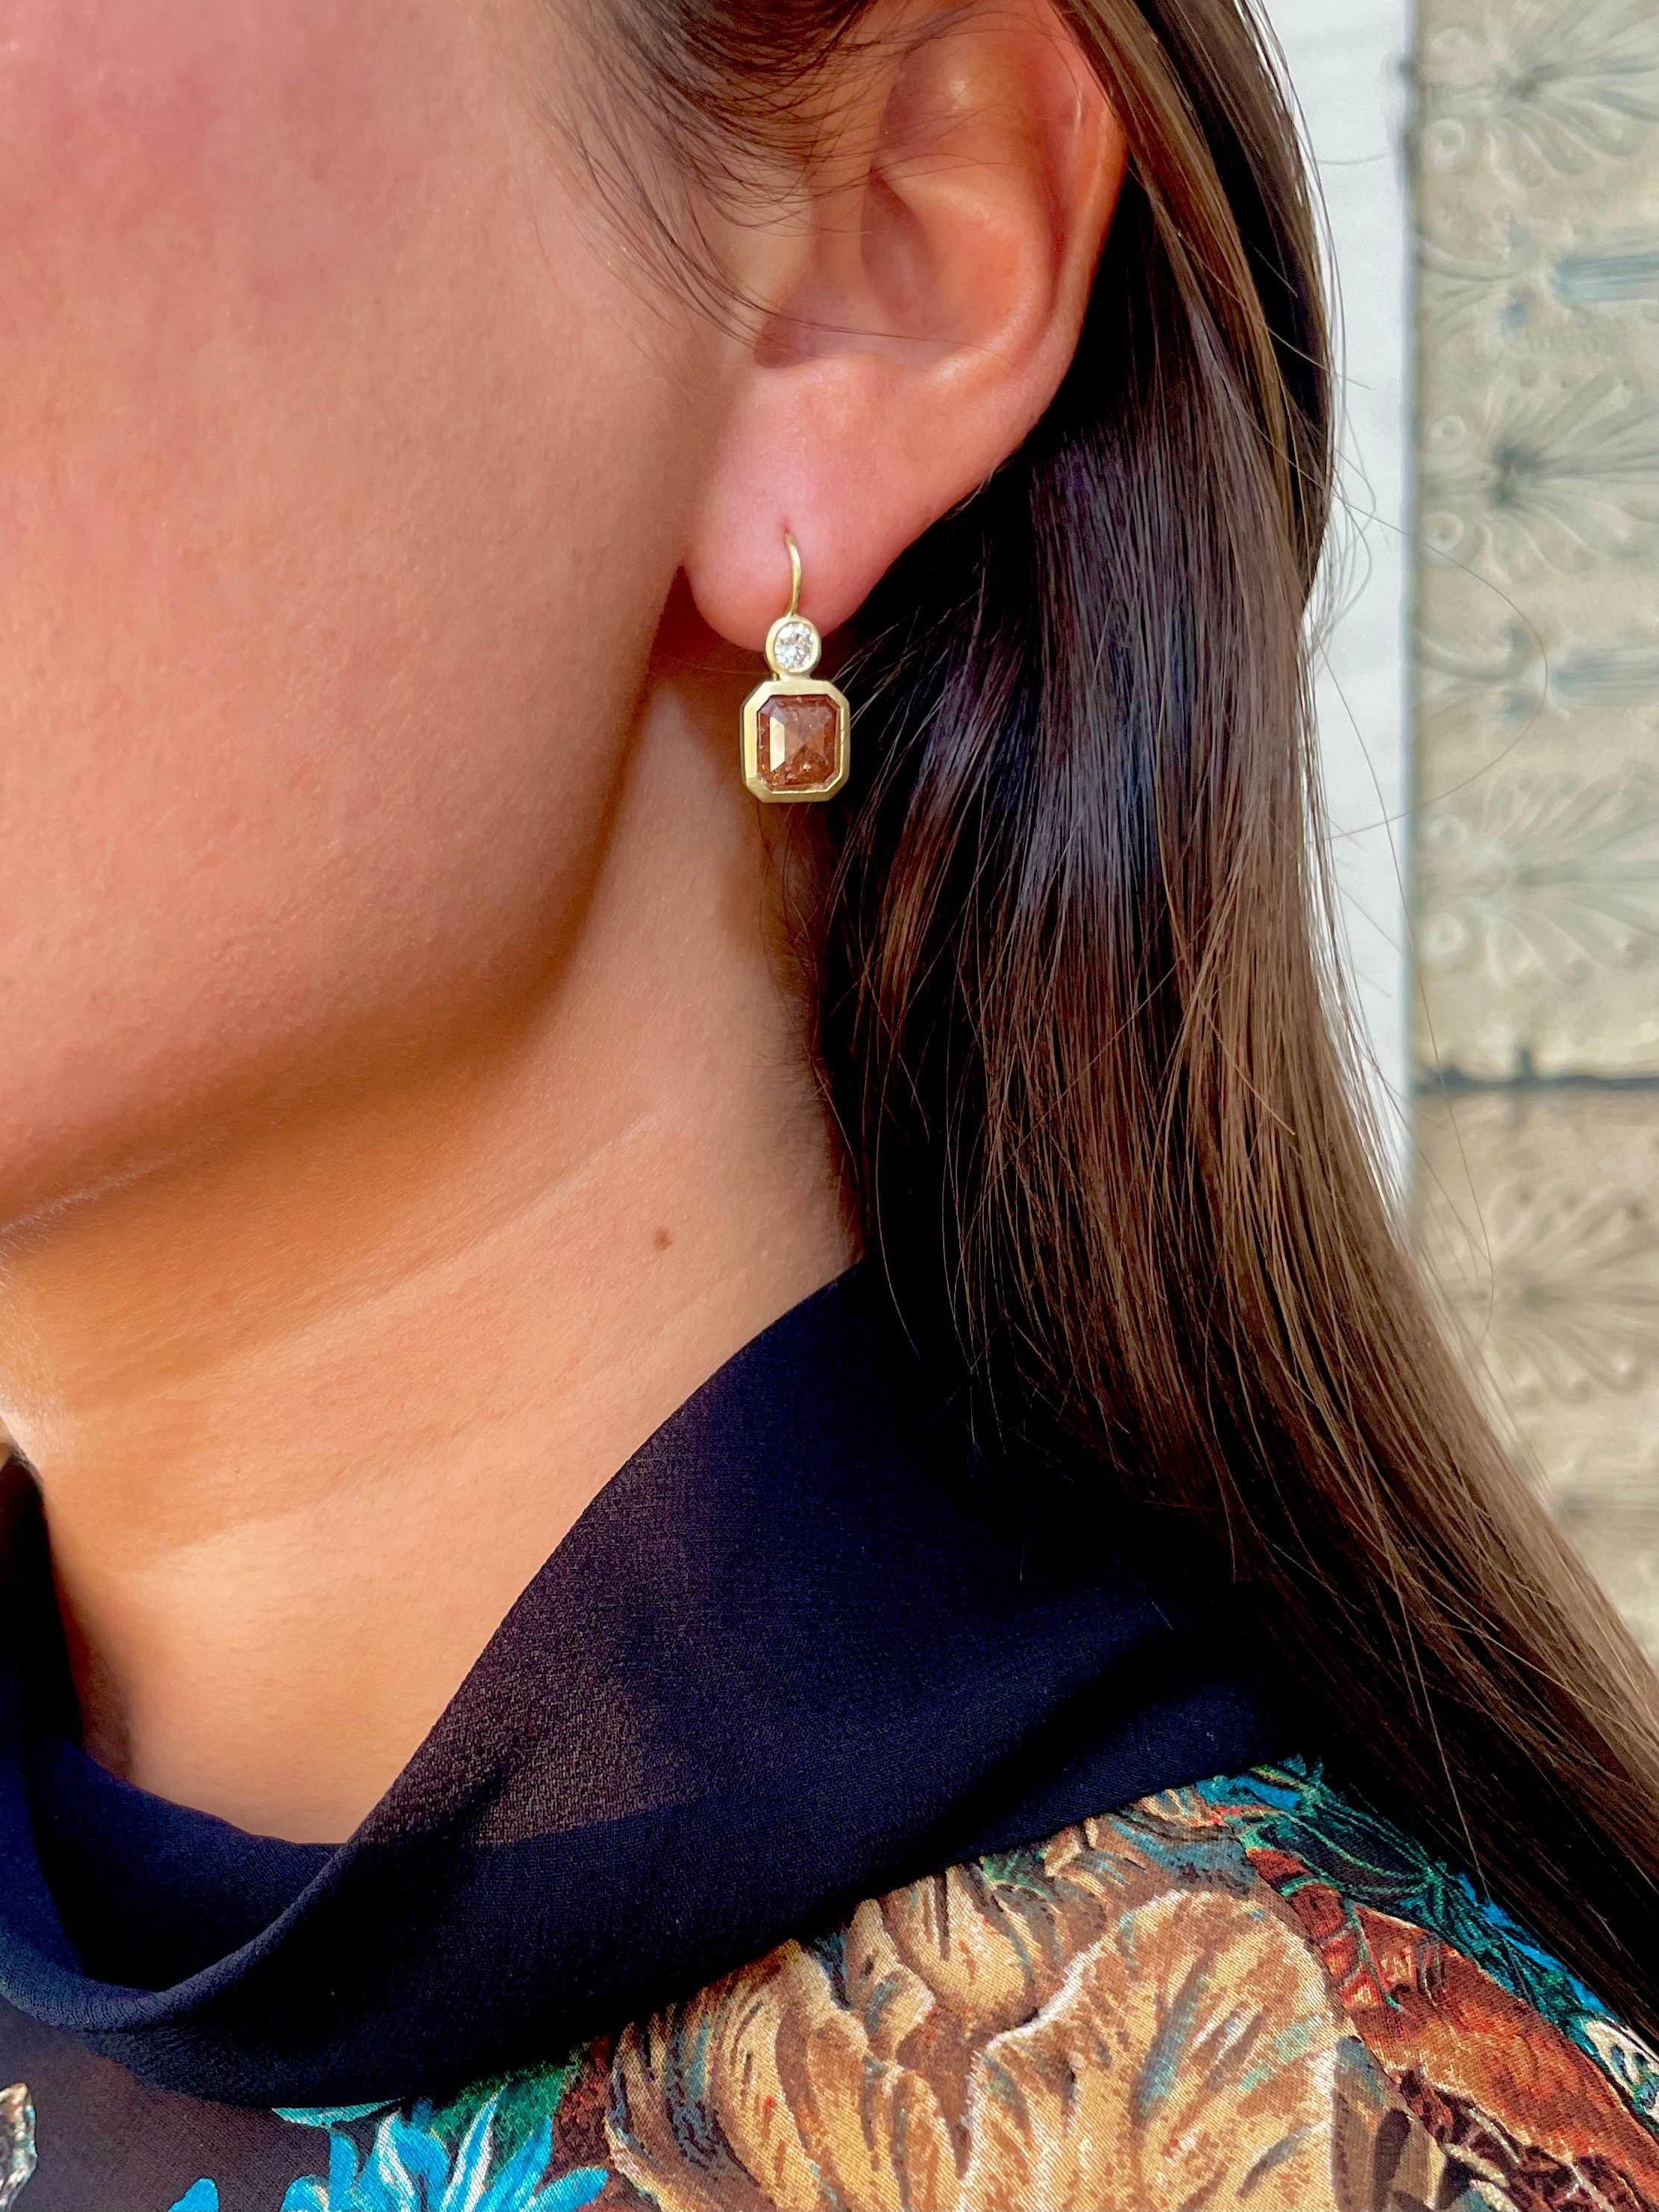 Faye Kim's one-of-a-kind 18 Karat Gold Blush-Colored Milky and White Diamond Earrings comprise bezel-set stones that contrast beautifully with both each other and their gold matte finish. Hinged ear wires allow for movement and show off the